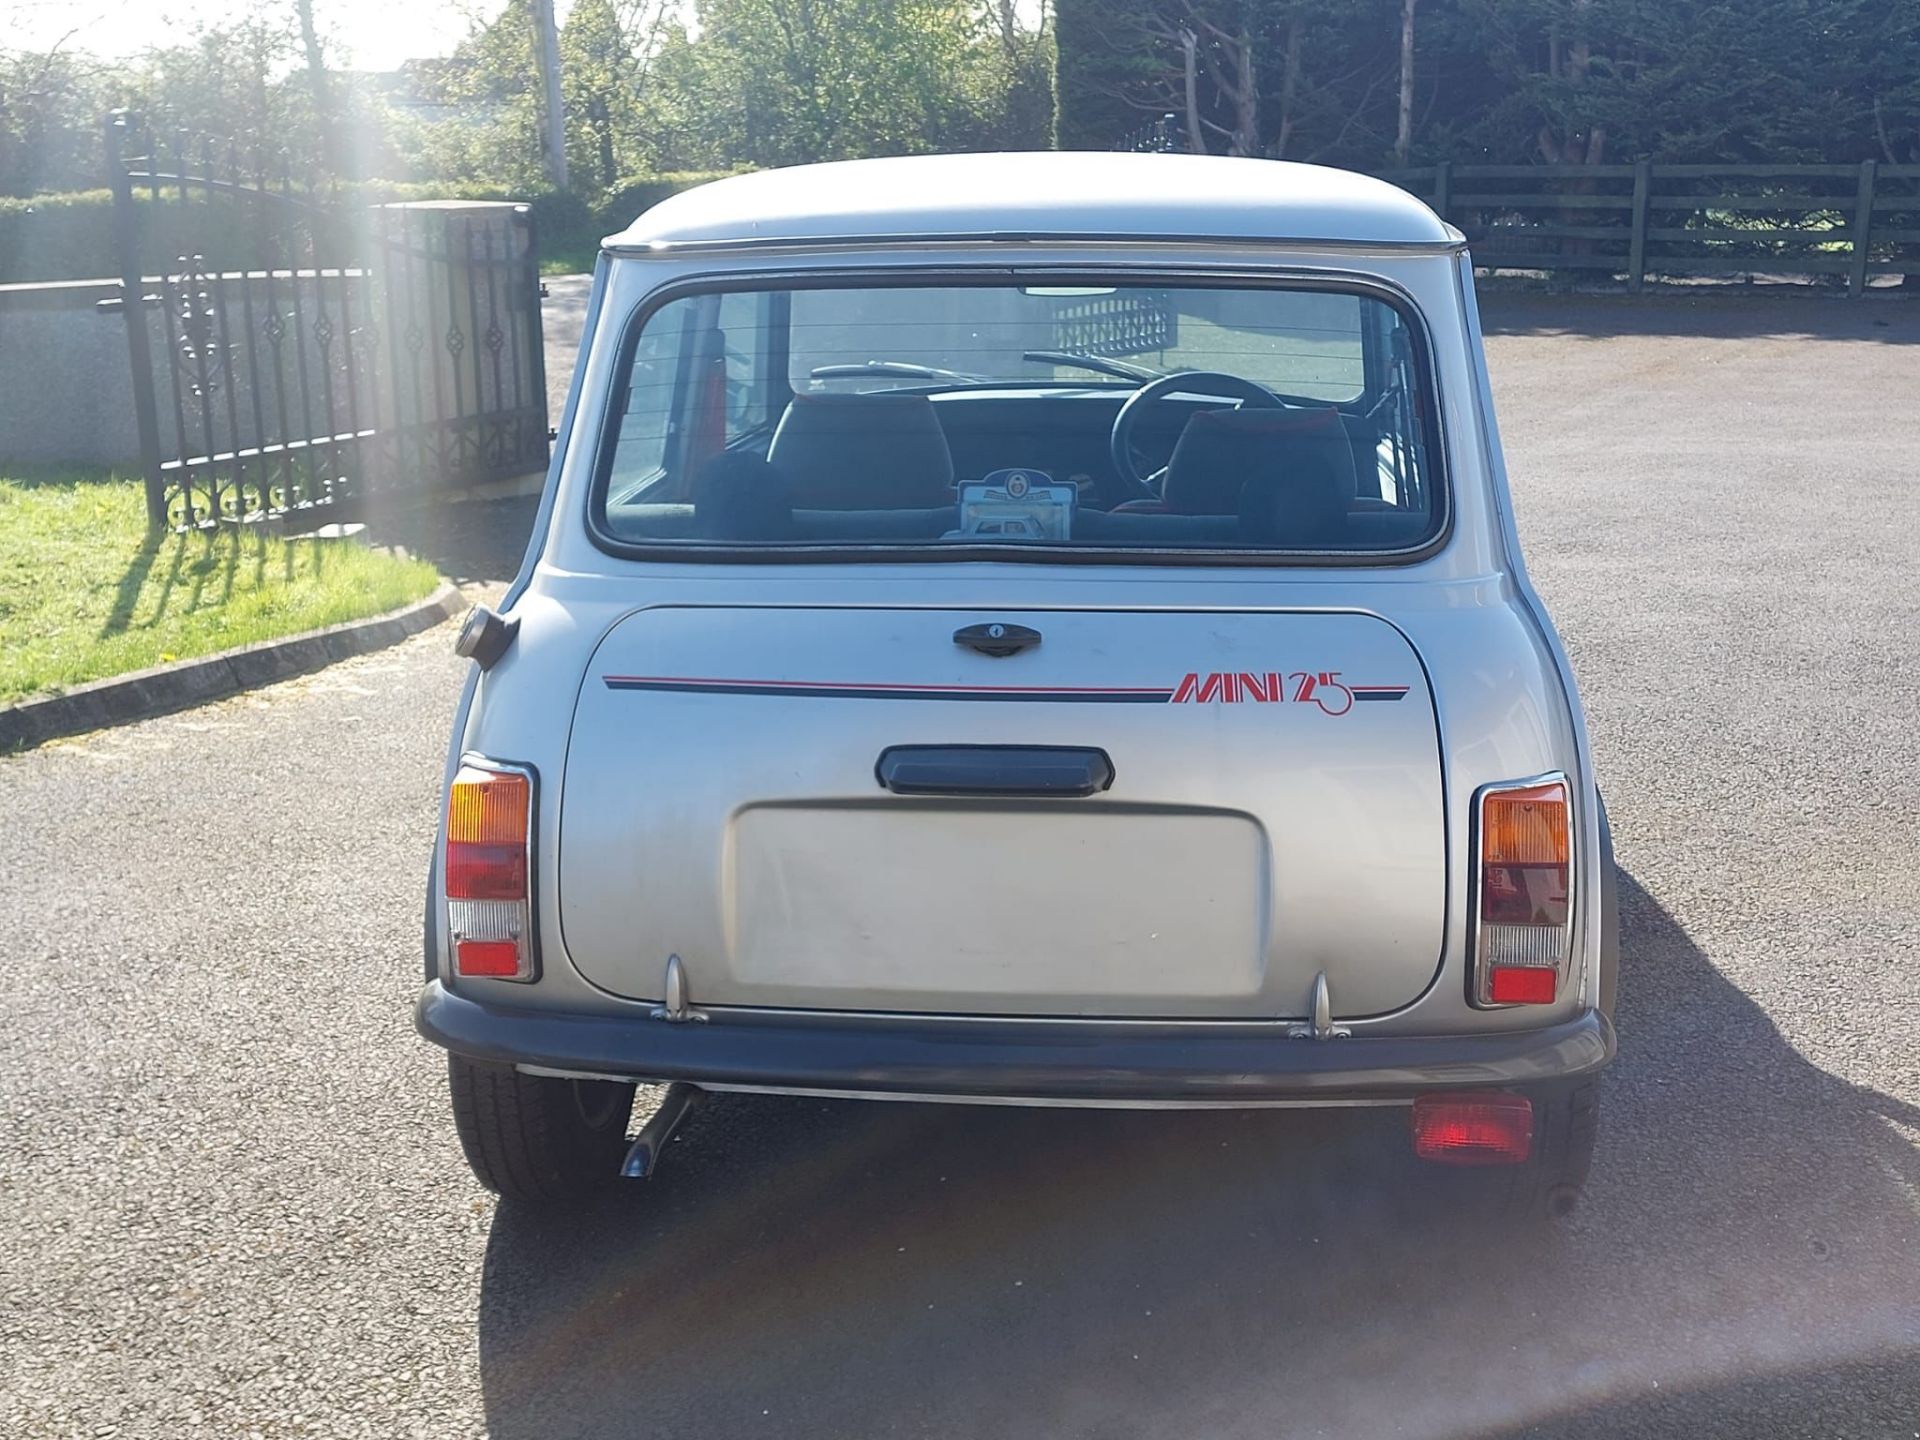 1984 Mini 25 - Only 39.9 miles from new - Image 10 of 52